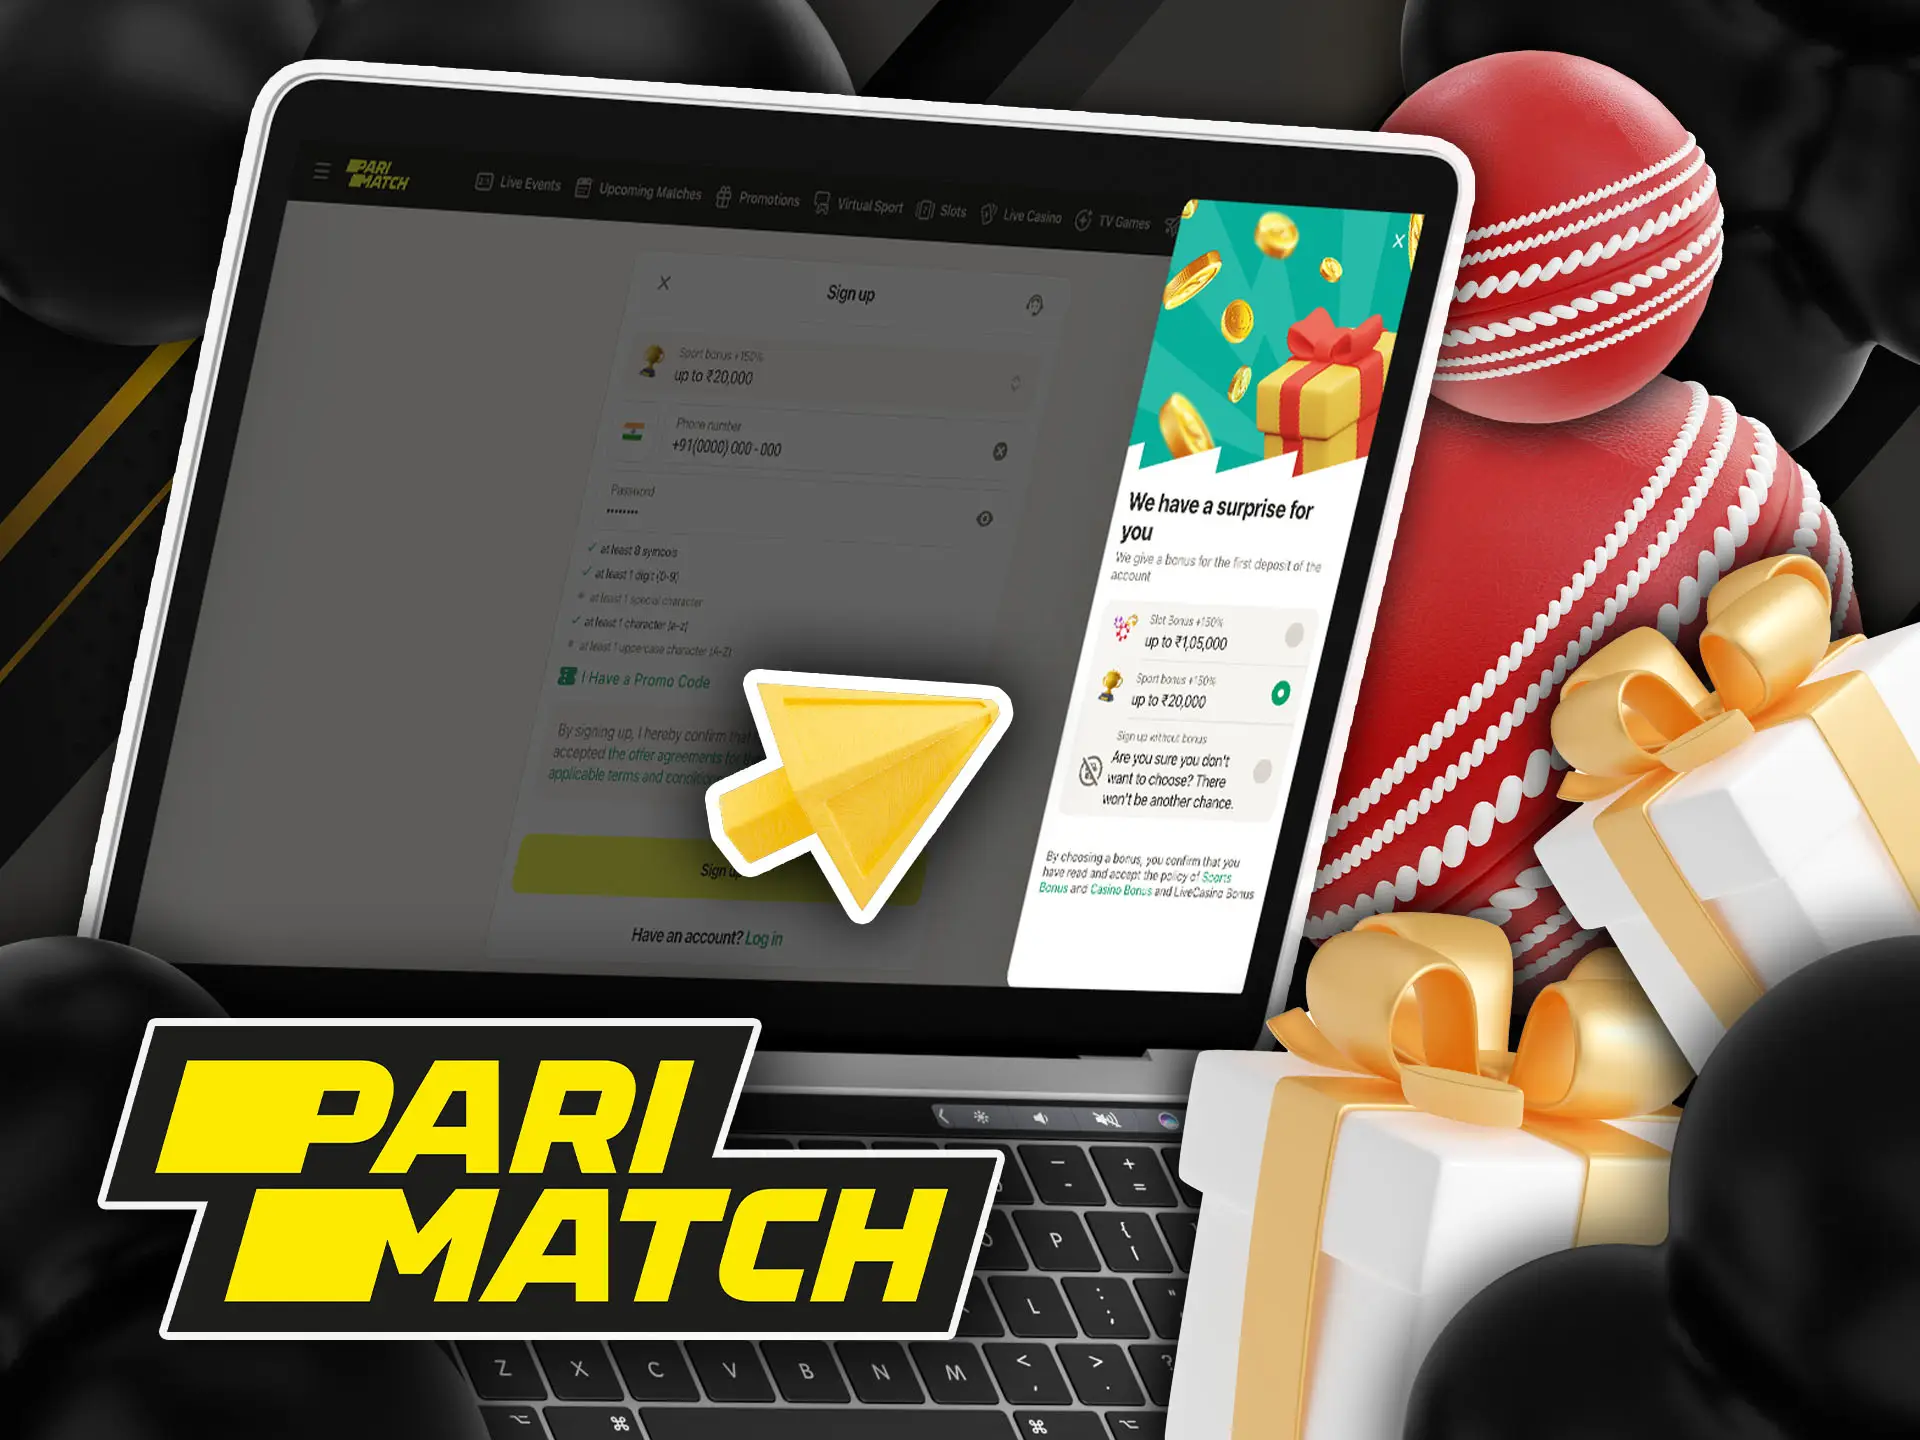 Welcome bonus on sports for Parimatch in India.